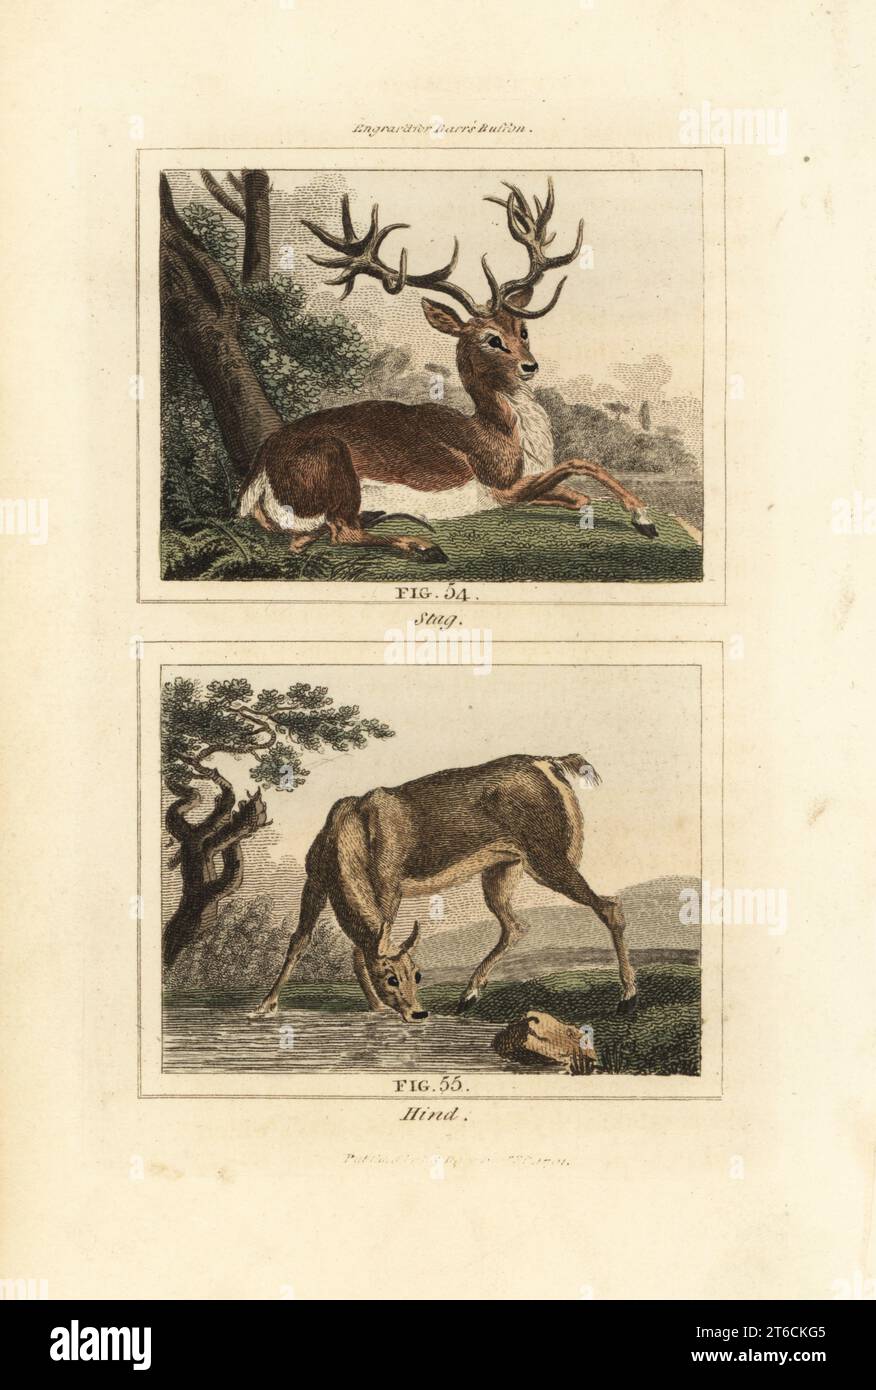 Red deer, Cervus elaphus, stag 54 and hind 55. Handcoloured copperplate engraving after Jacques de Seve from James Smith Barrs edition of Comte Buffons Natural History, A Theory of the Earth, General History of Man, Brute Creation, Vegetables, Minerals, T. Gillet, H. D. Symonds, Paternoster Row, London, 1807. Stock Photo